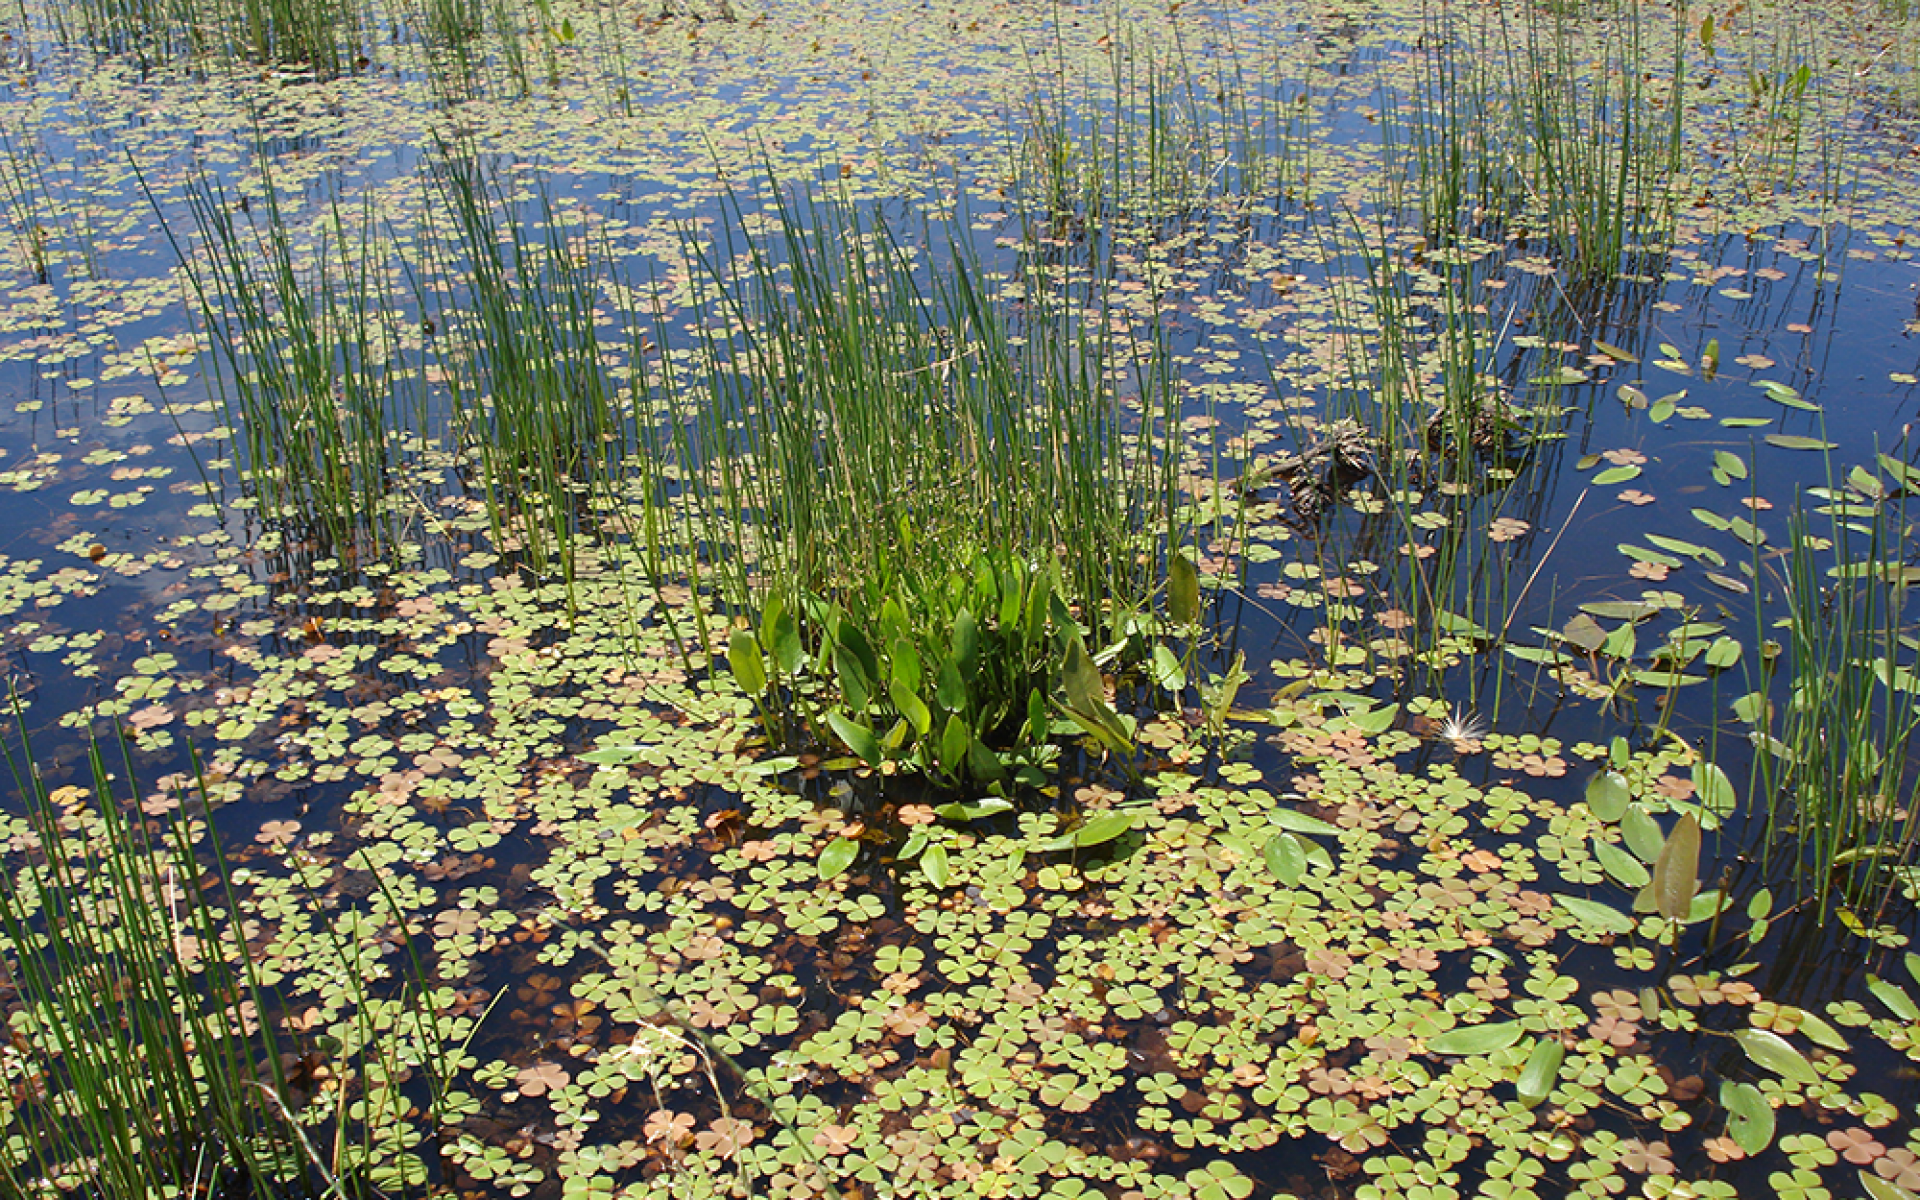 Herbaceous leaves in a wetland with green grass surrounding them